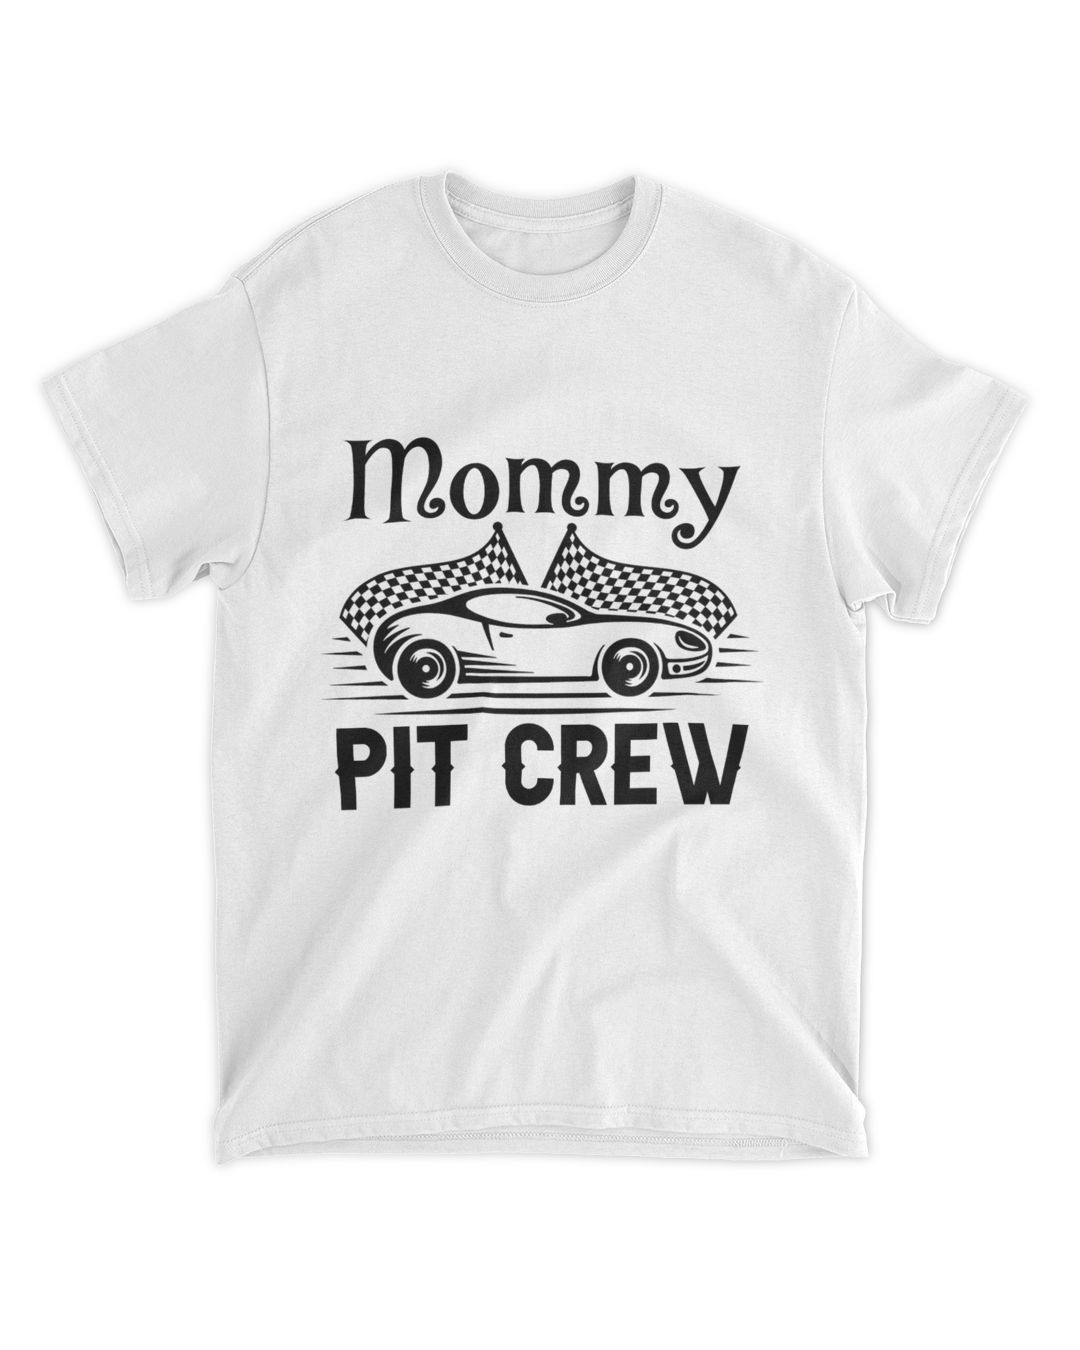 RD Mommy Pit Crew Shirt, Race Car Shirt, Birthday Party, Racing Family ...